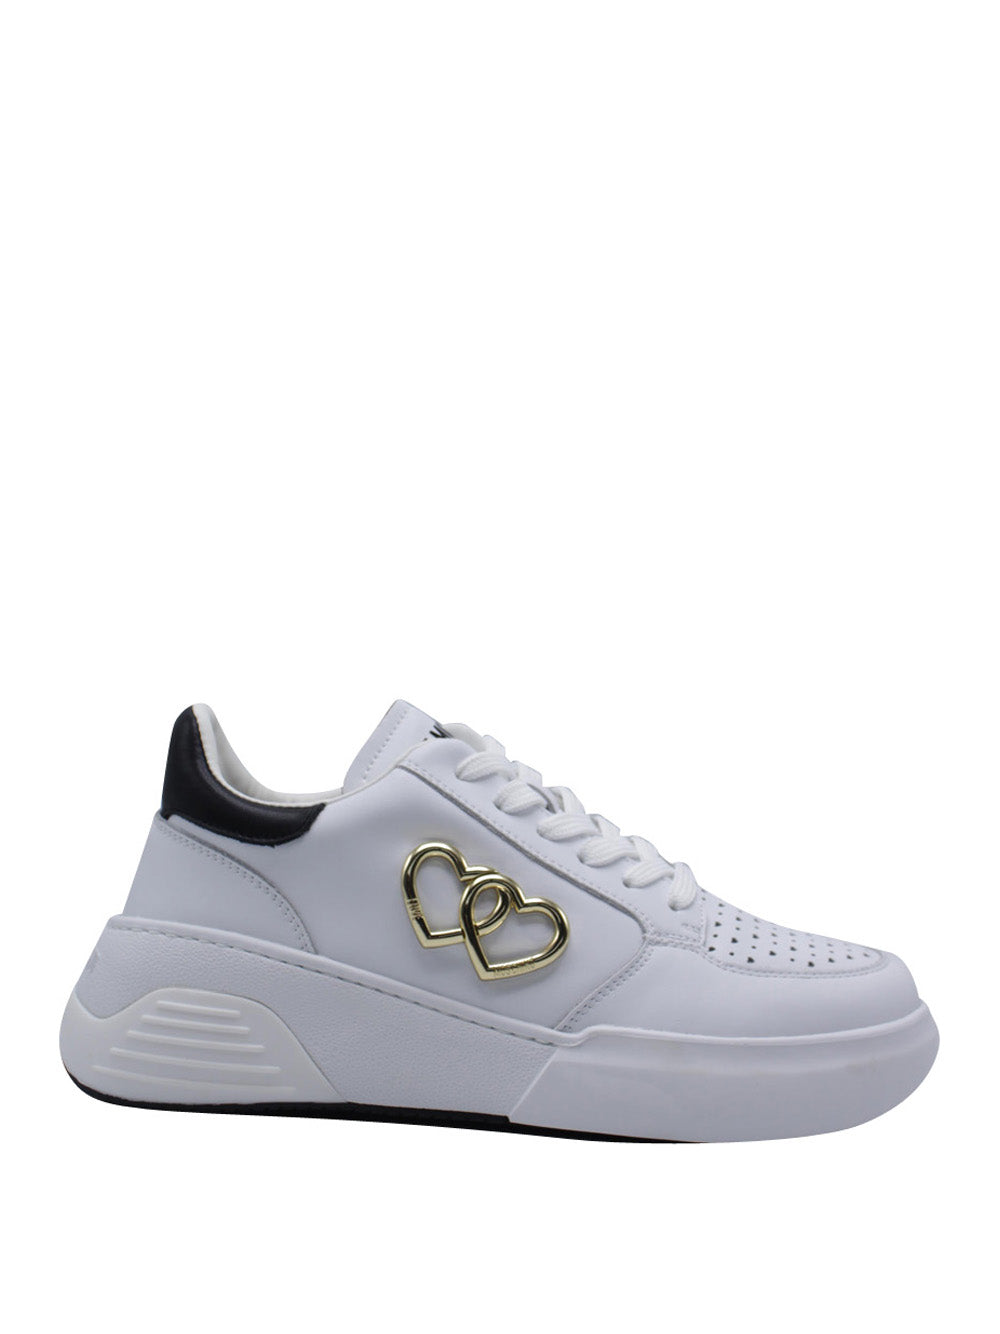 MOSCHINO Sneakers Donna - Bianco